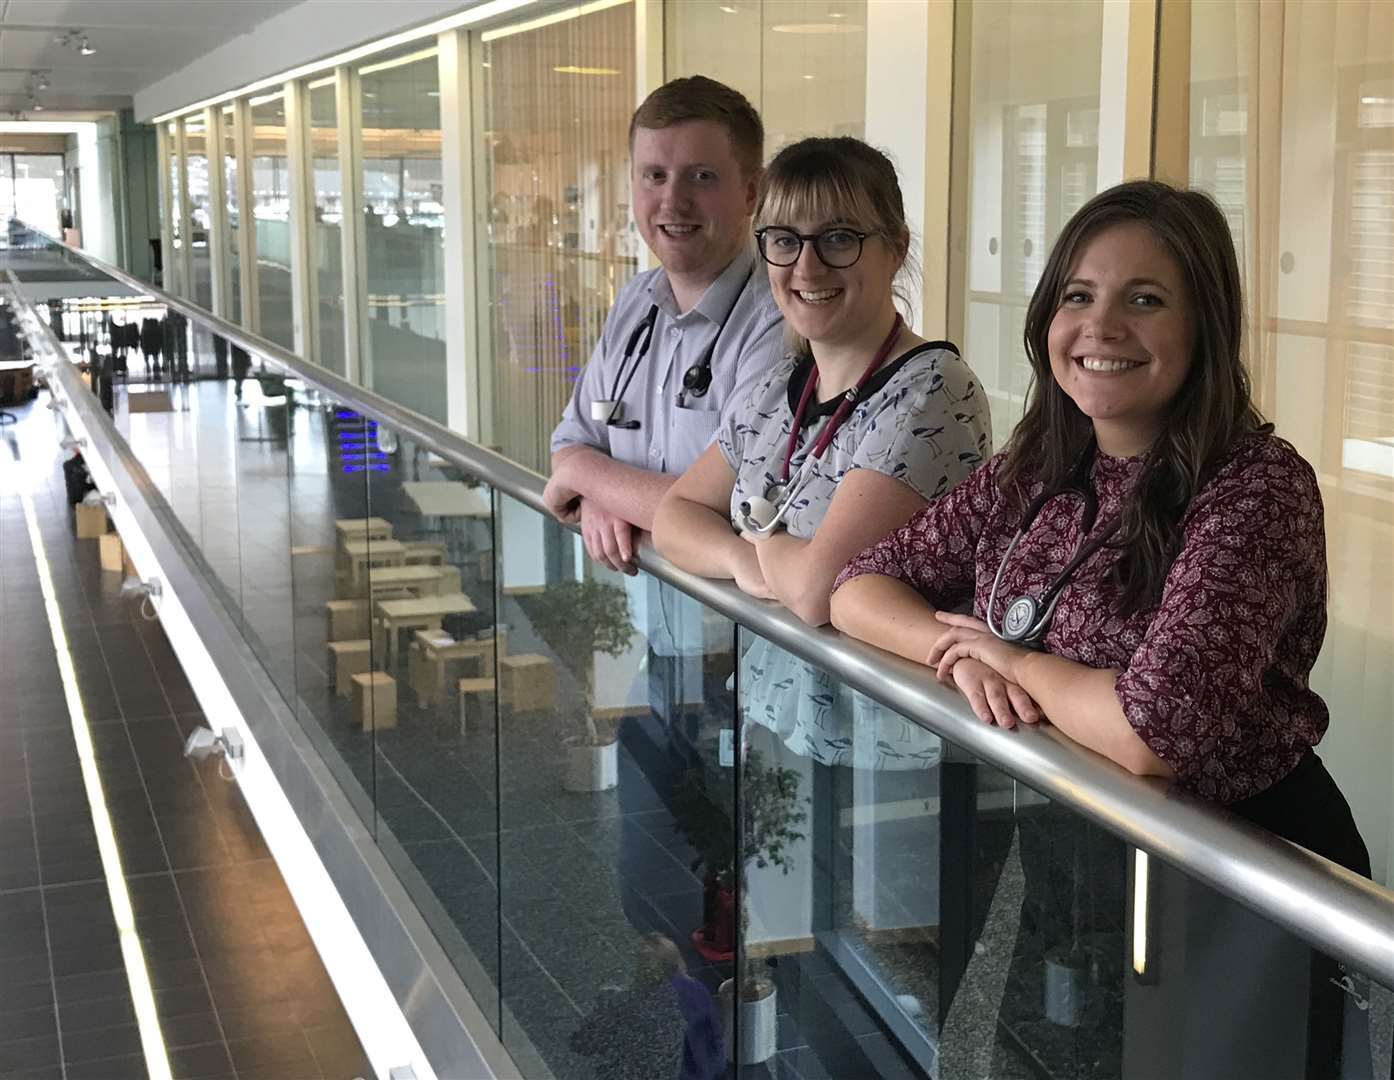 Physician associate students (L to R) Liam Allan, Katya MacKenzie and Frances Seahafer